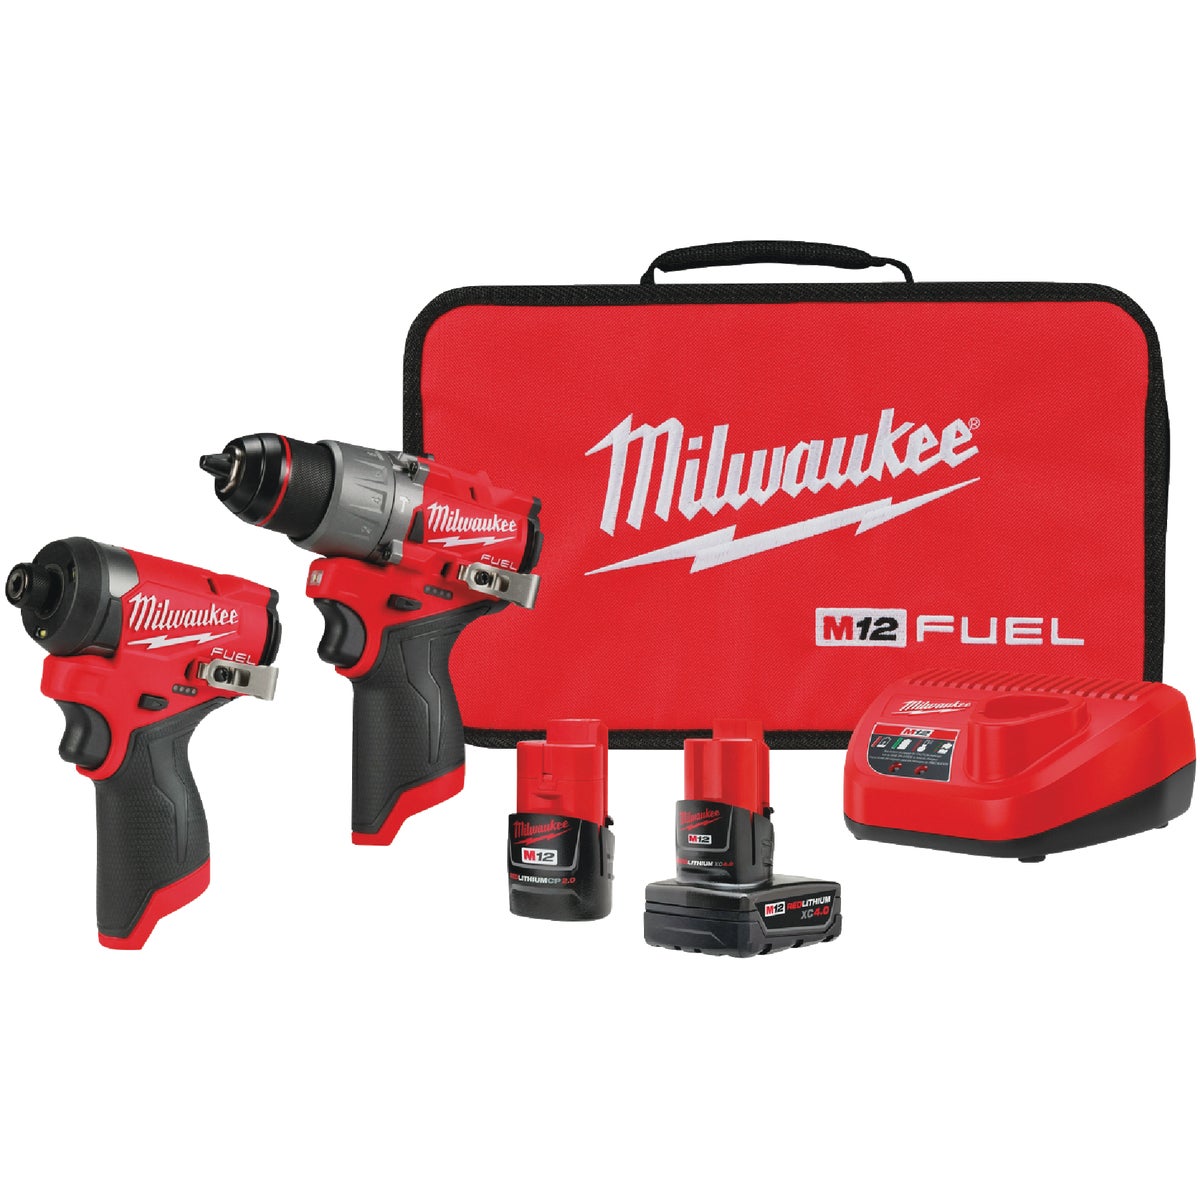 Item 303649, MILWAUKEE M12 FUEL 2-Tool Combo Kit has the Most Powerful Subcompact Drill